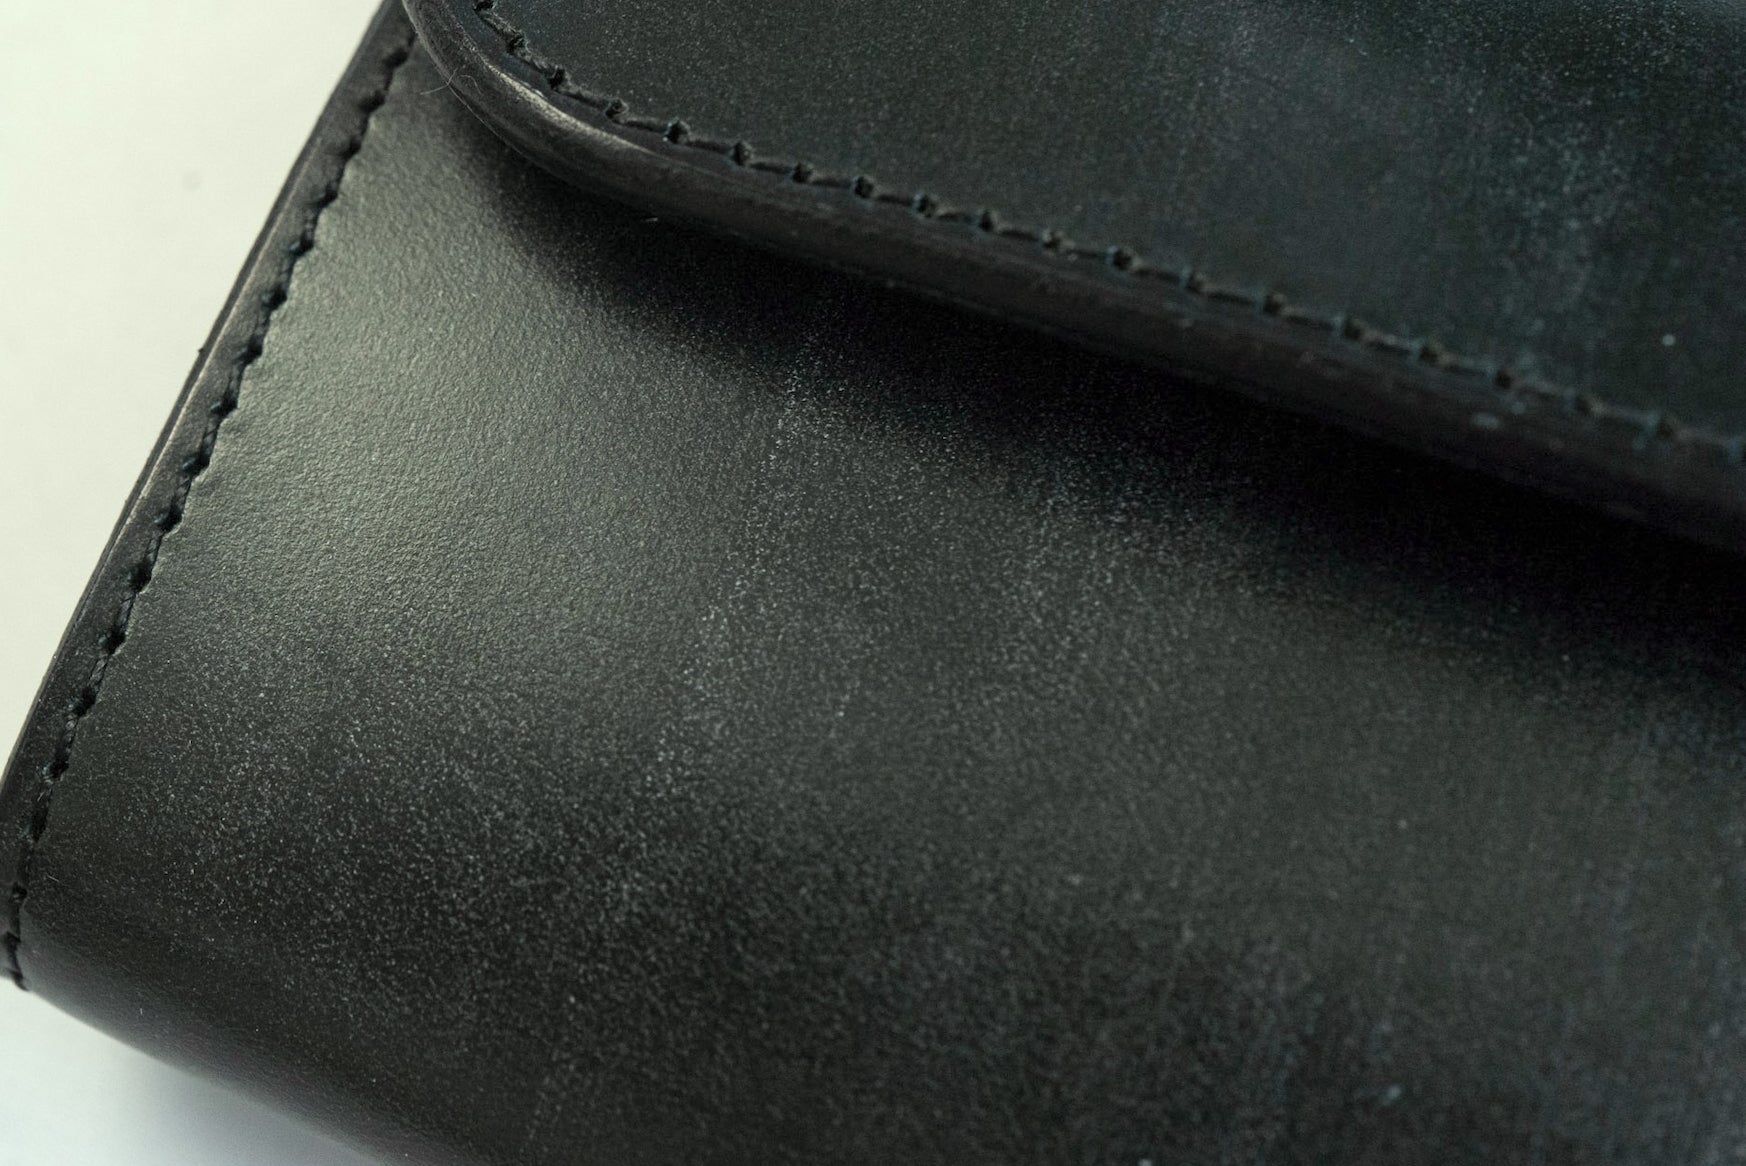 Inception by Accel Company 'Bridle Cowhide' Middle Wallets (Dark Green)